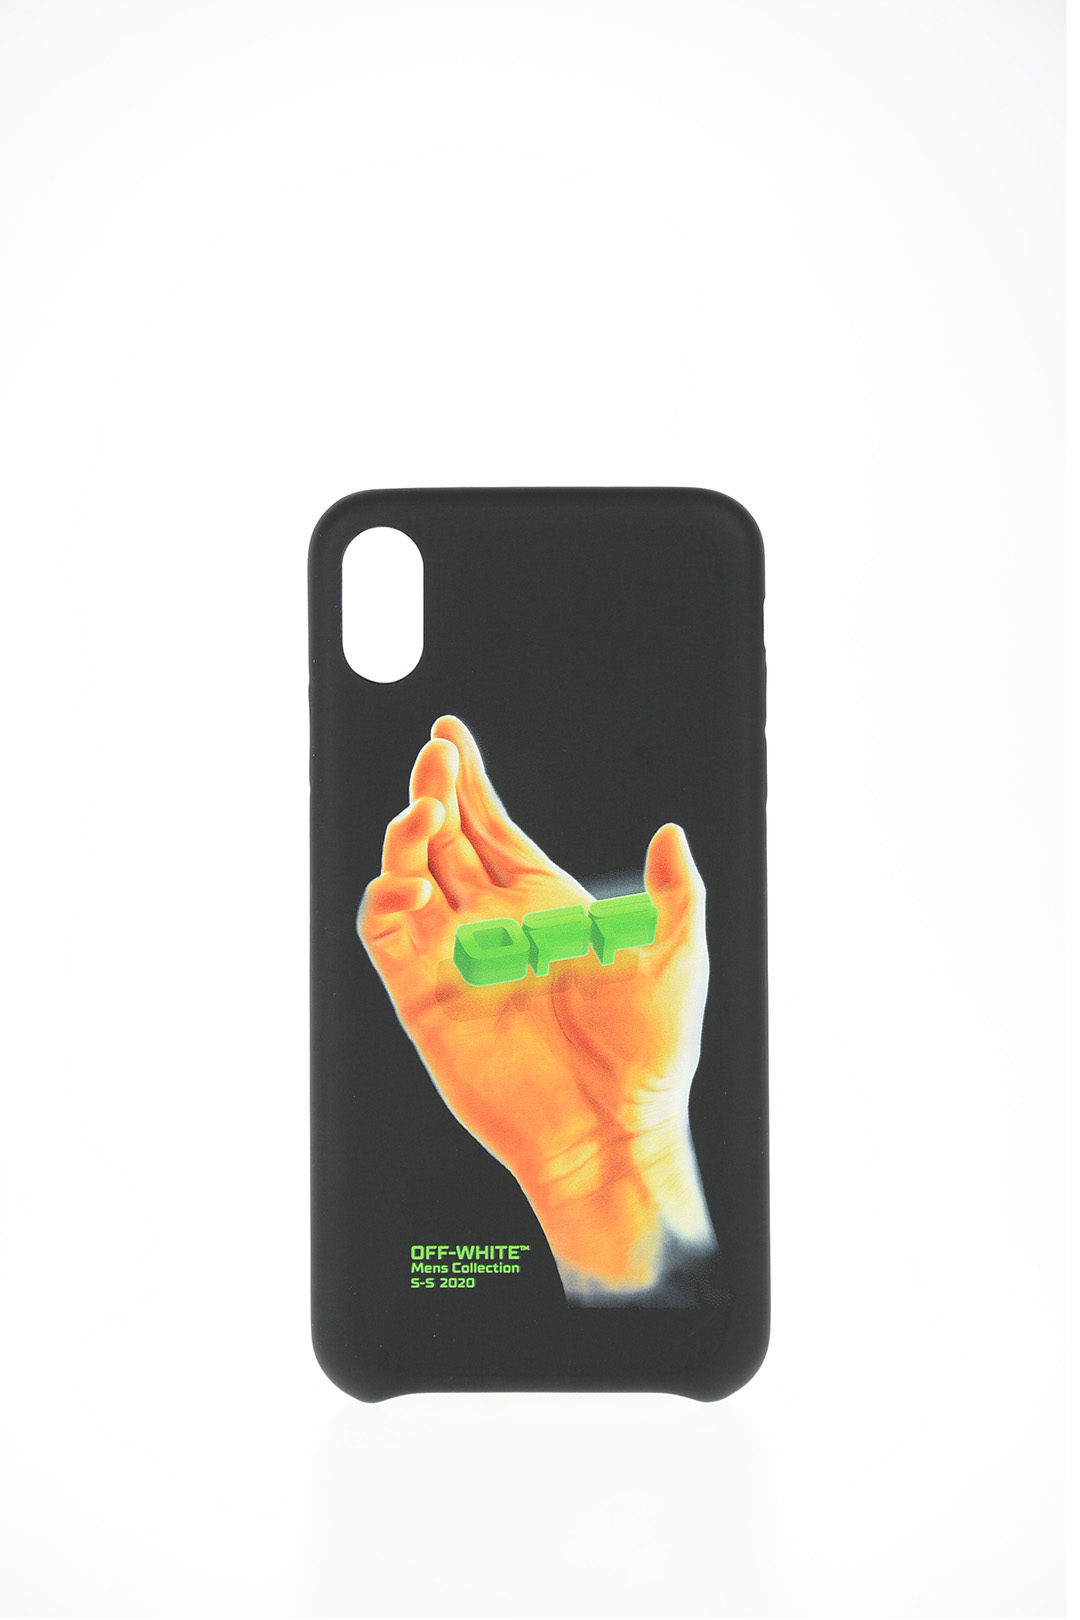 Iphone XS MAX Hand Logo Cover Case unisex men women - Glamood Outlet